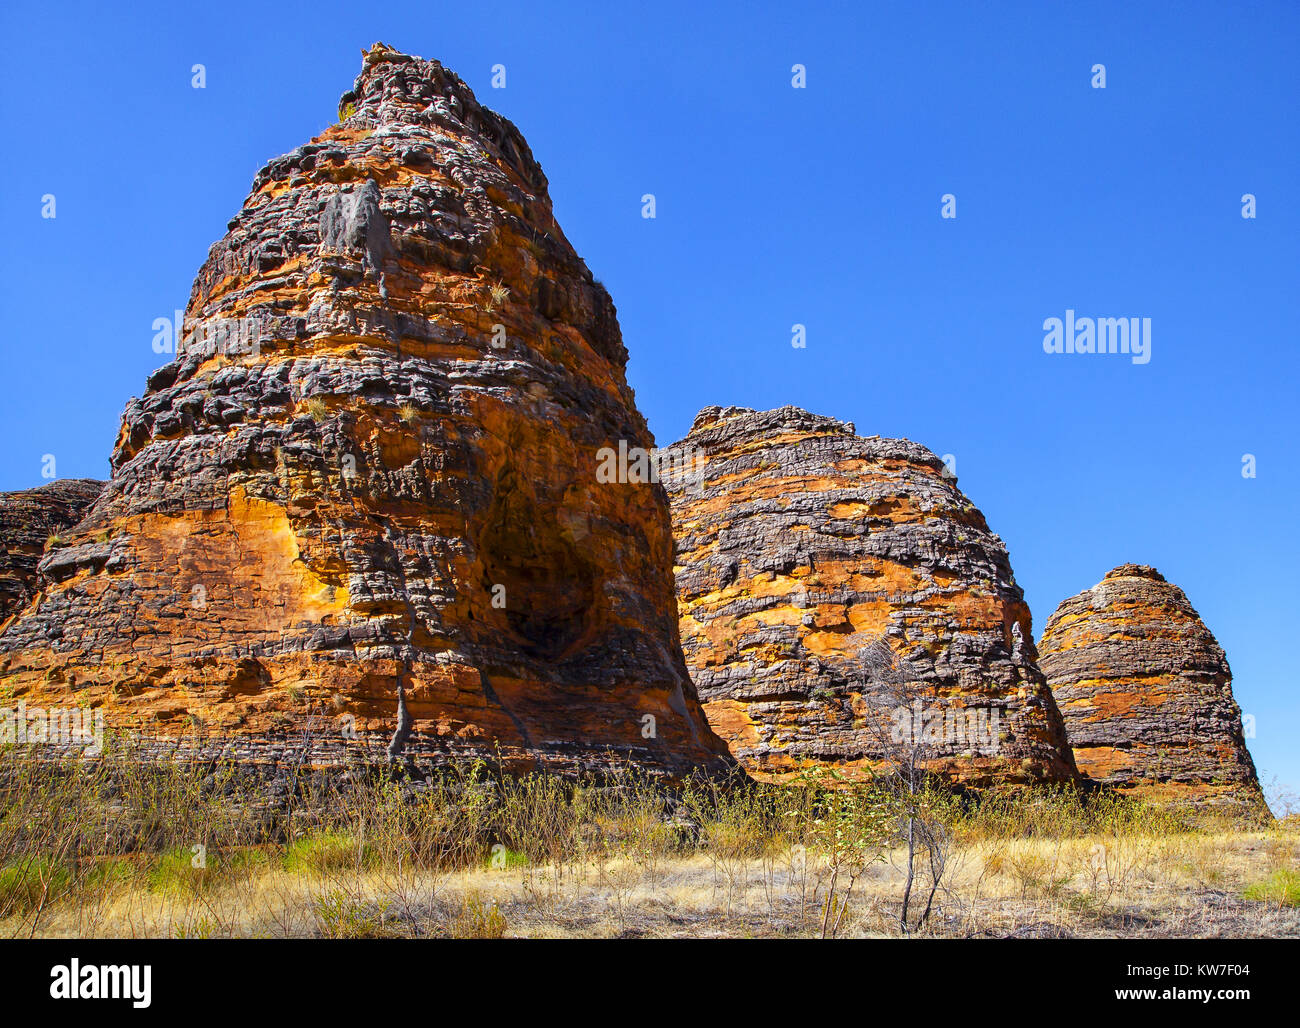 The majestic beehive like sandstone formations rise out of the landscape, Bungle Bungles, Purnululu National Park, Western Australia, Australia Stock Photo